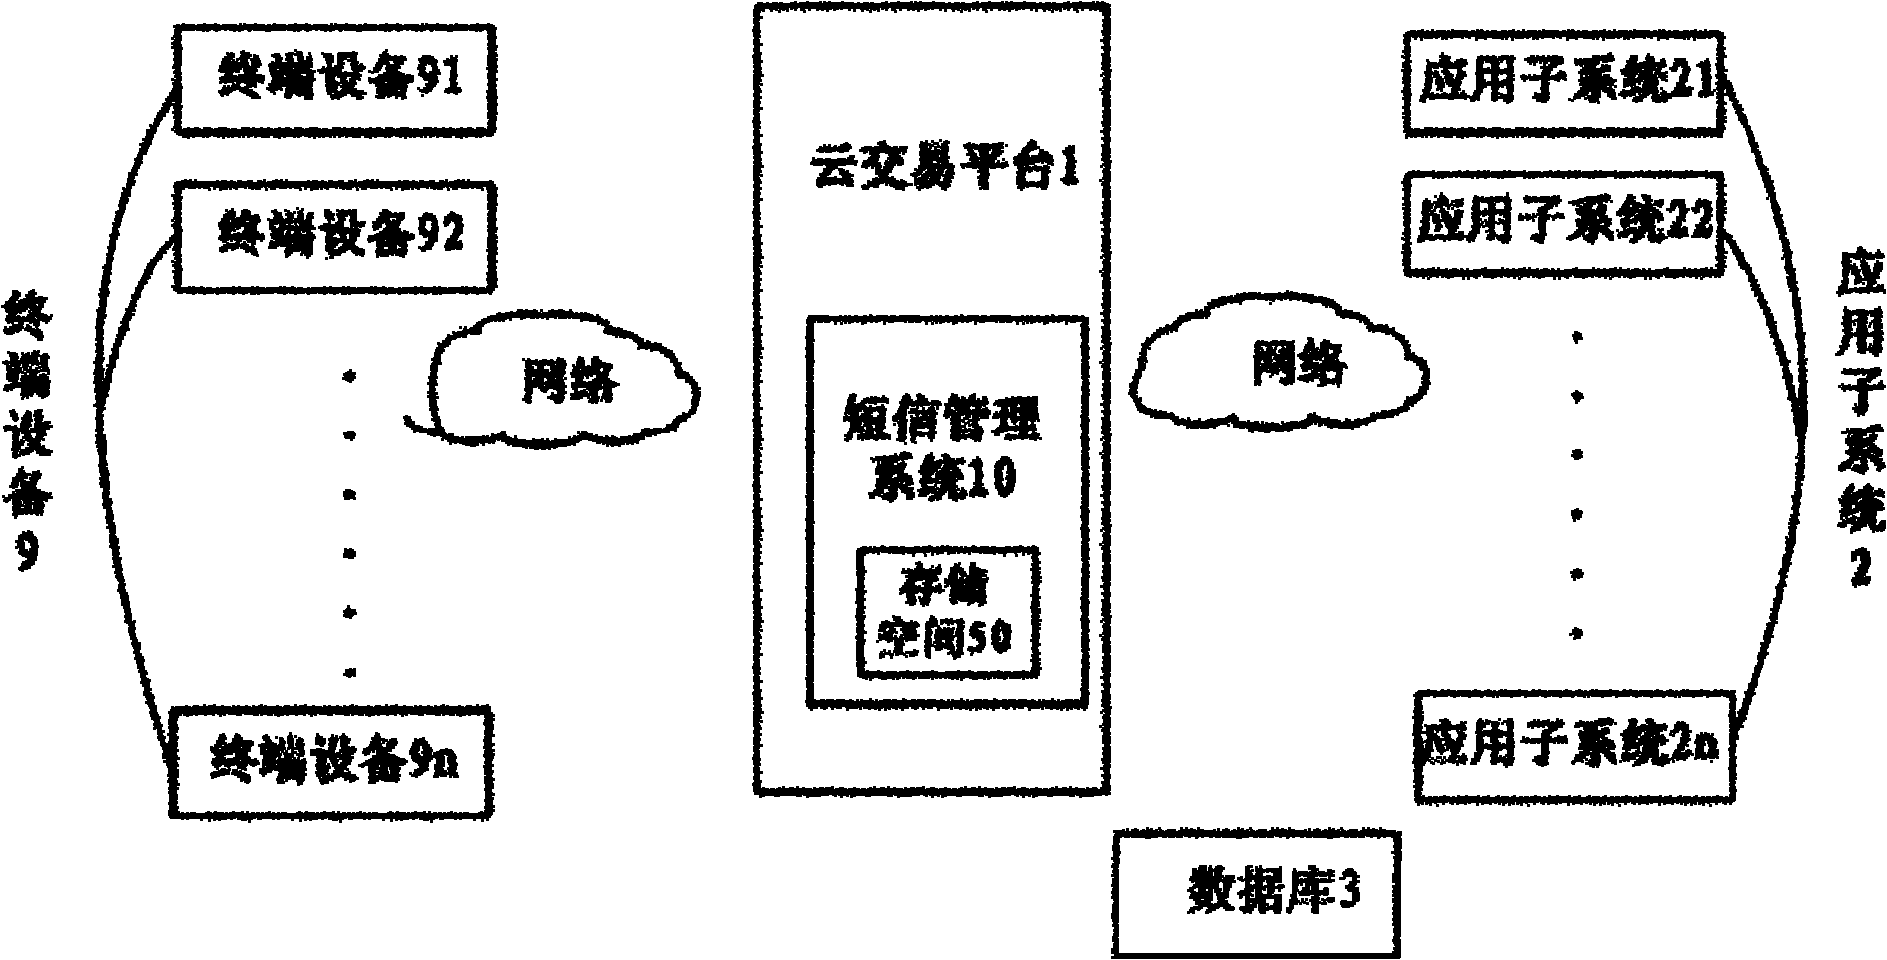 Short message receiving device matched with short message management system